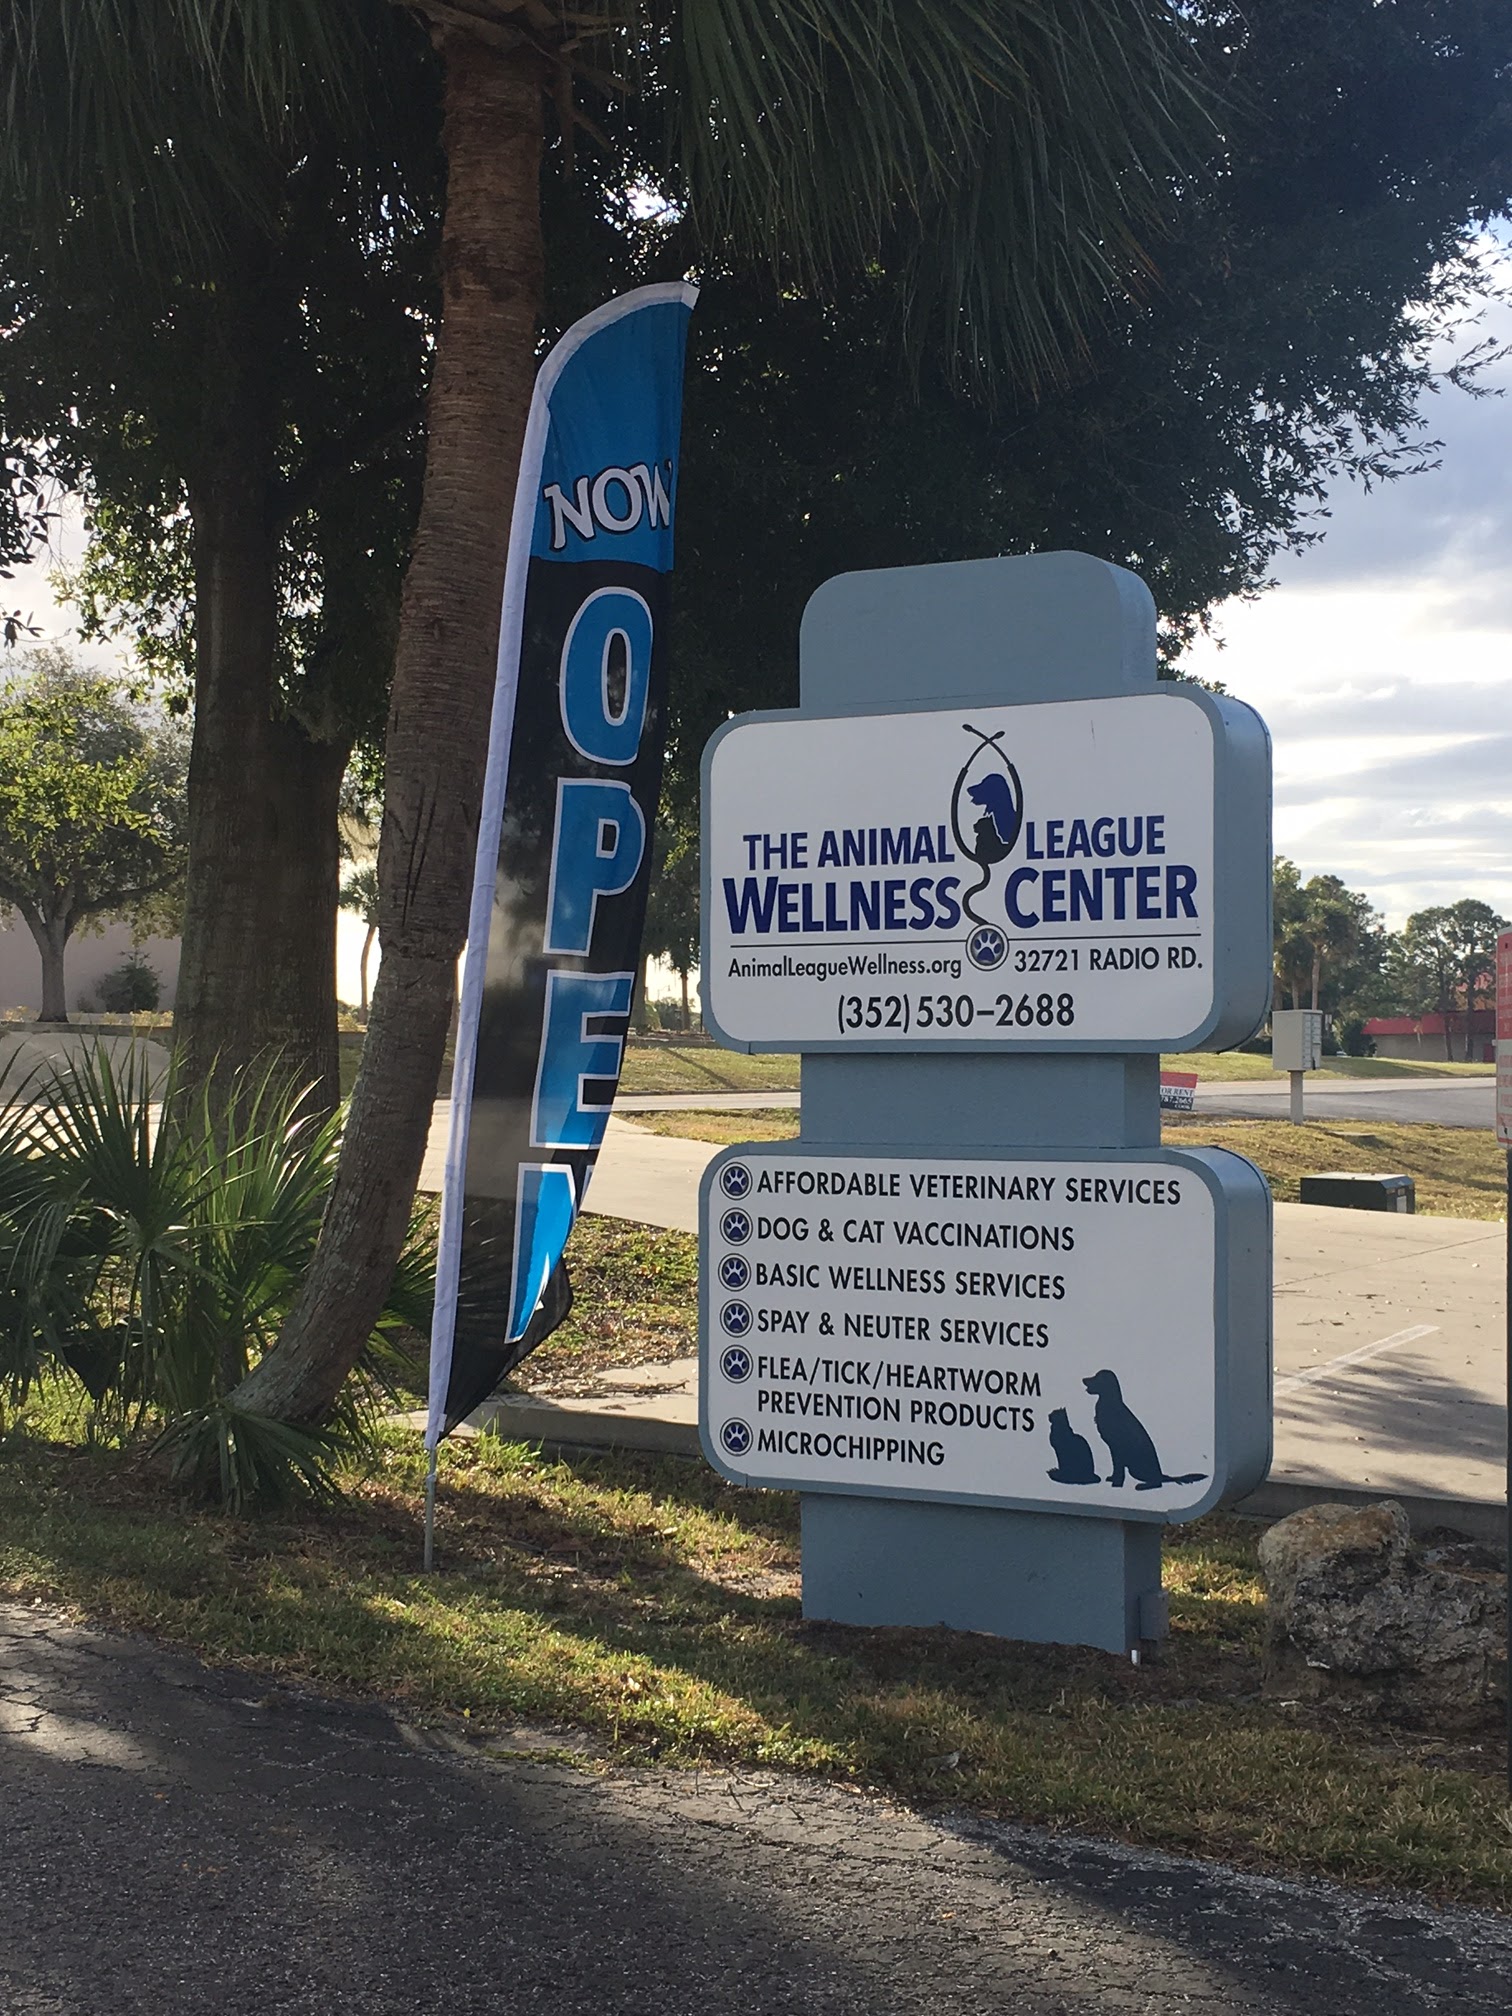 The Animal League Wellness Center - Affordable Veterinarian Services